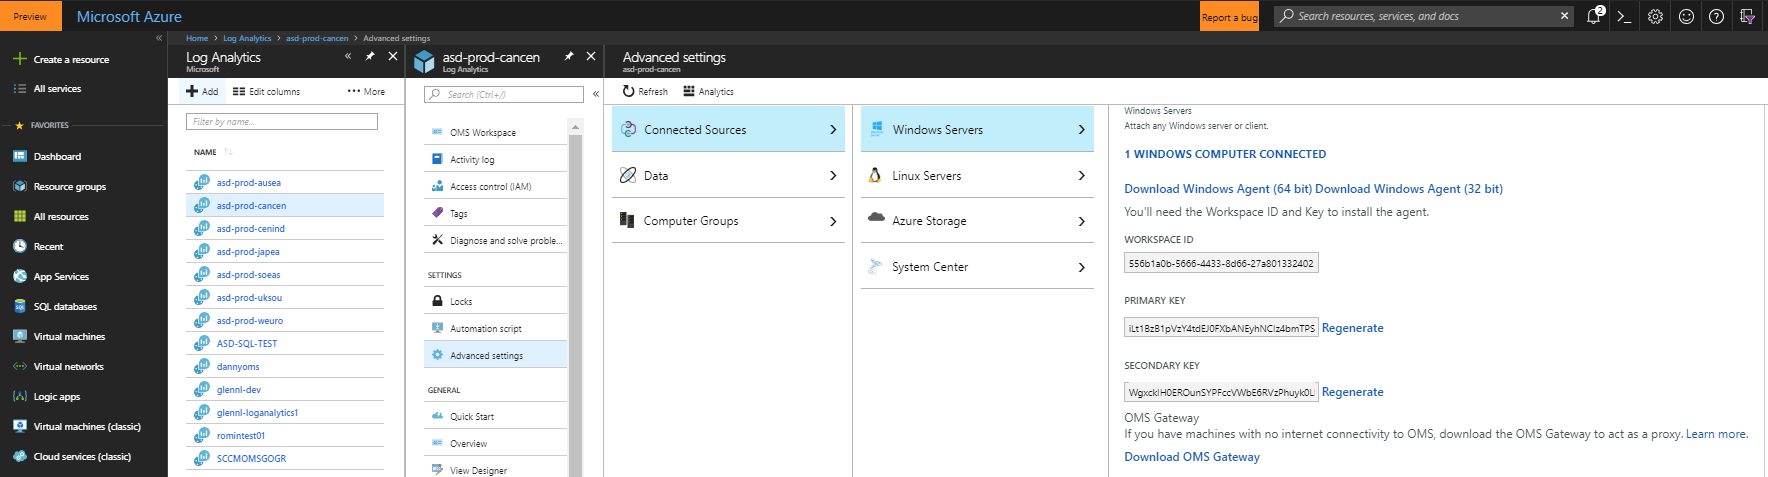 The Microsoft Azure window, which is showing the Connected Sources and Windows Servers menu items are selected.